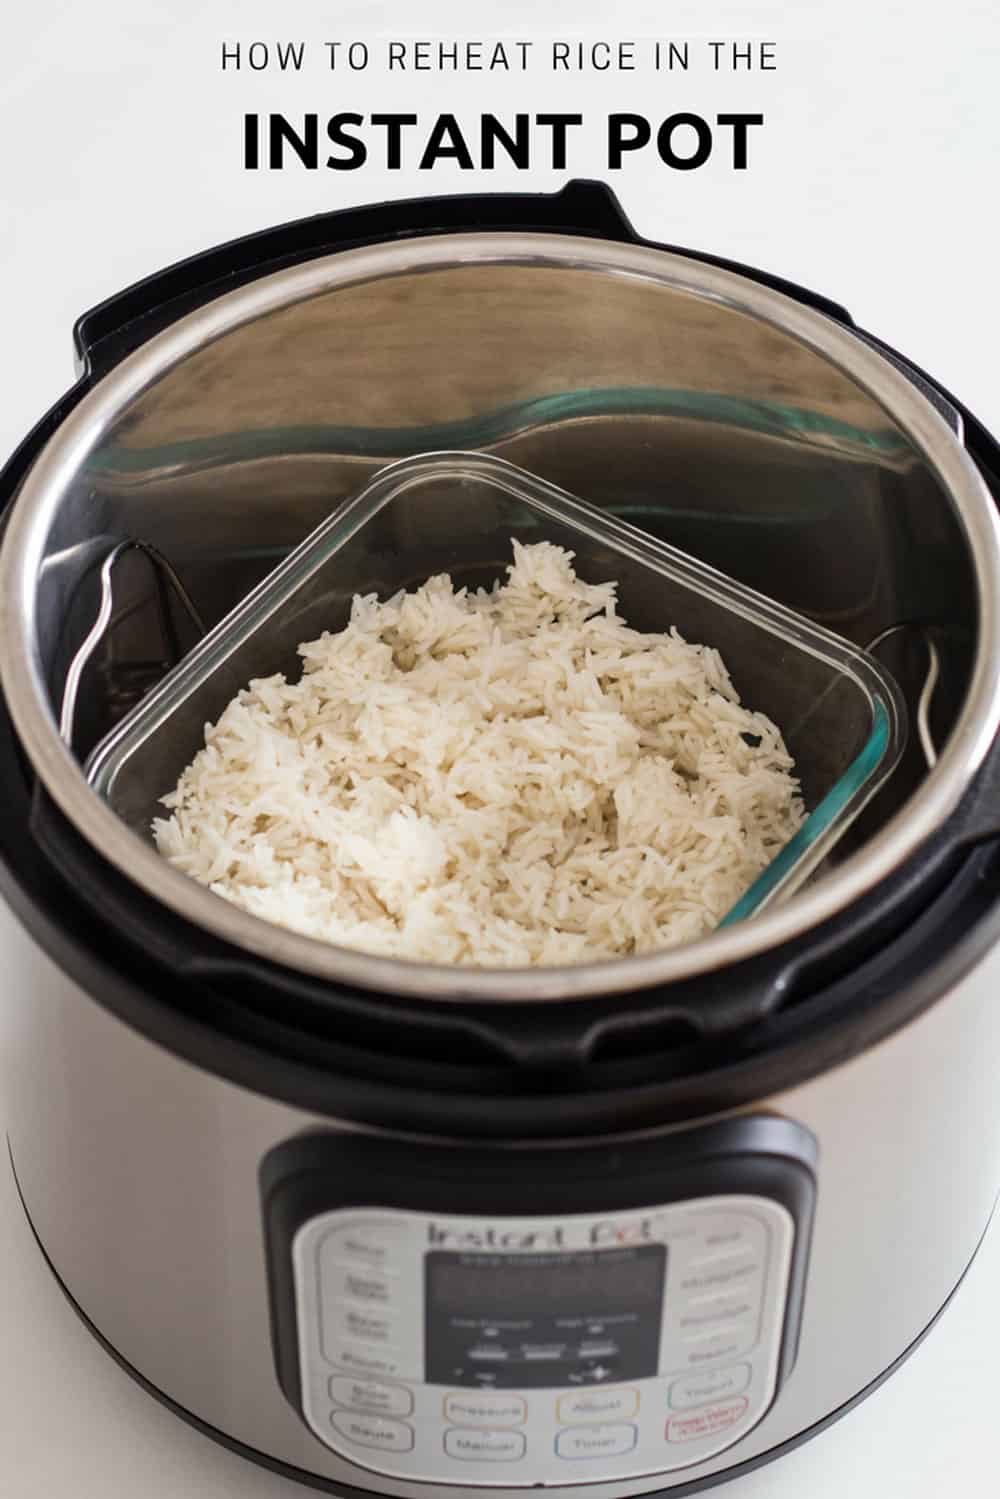 Cooked white rice in a glass bowl placed inside of an open Instant Pot